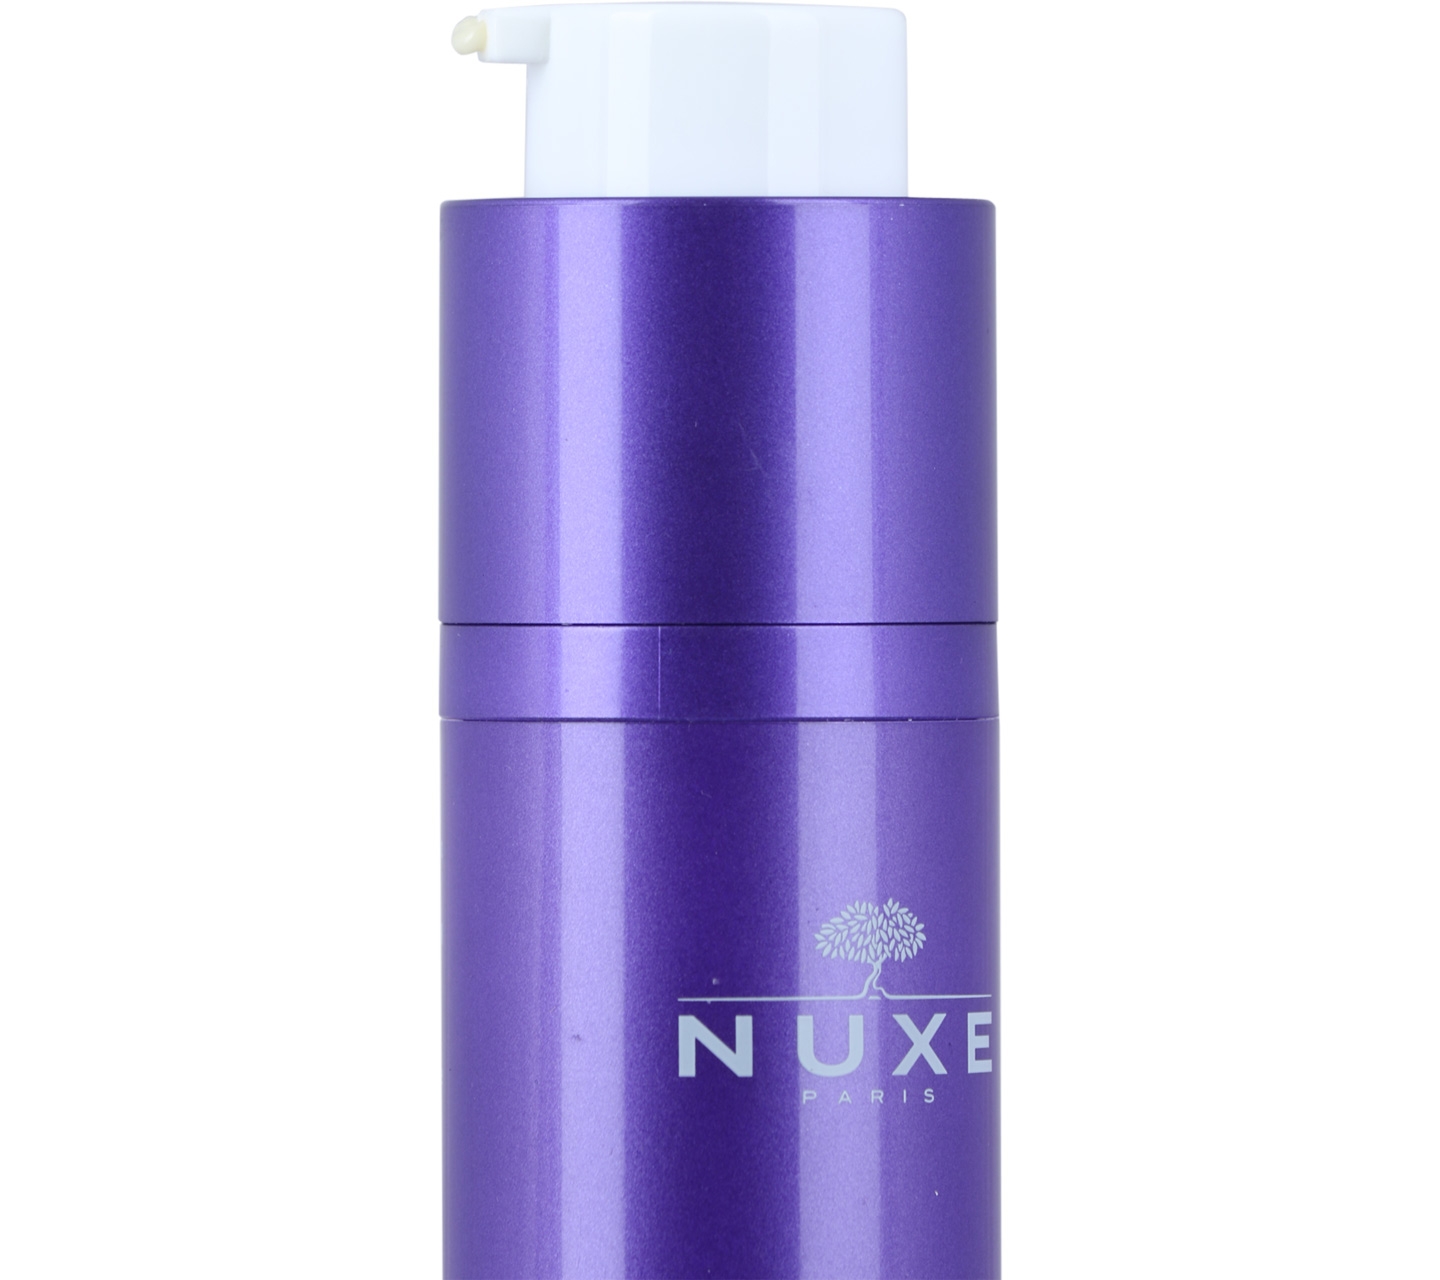 Nuxe Nuxellence Detoxifying And Youth Revealing Anti-Aging Care Skin Care